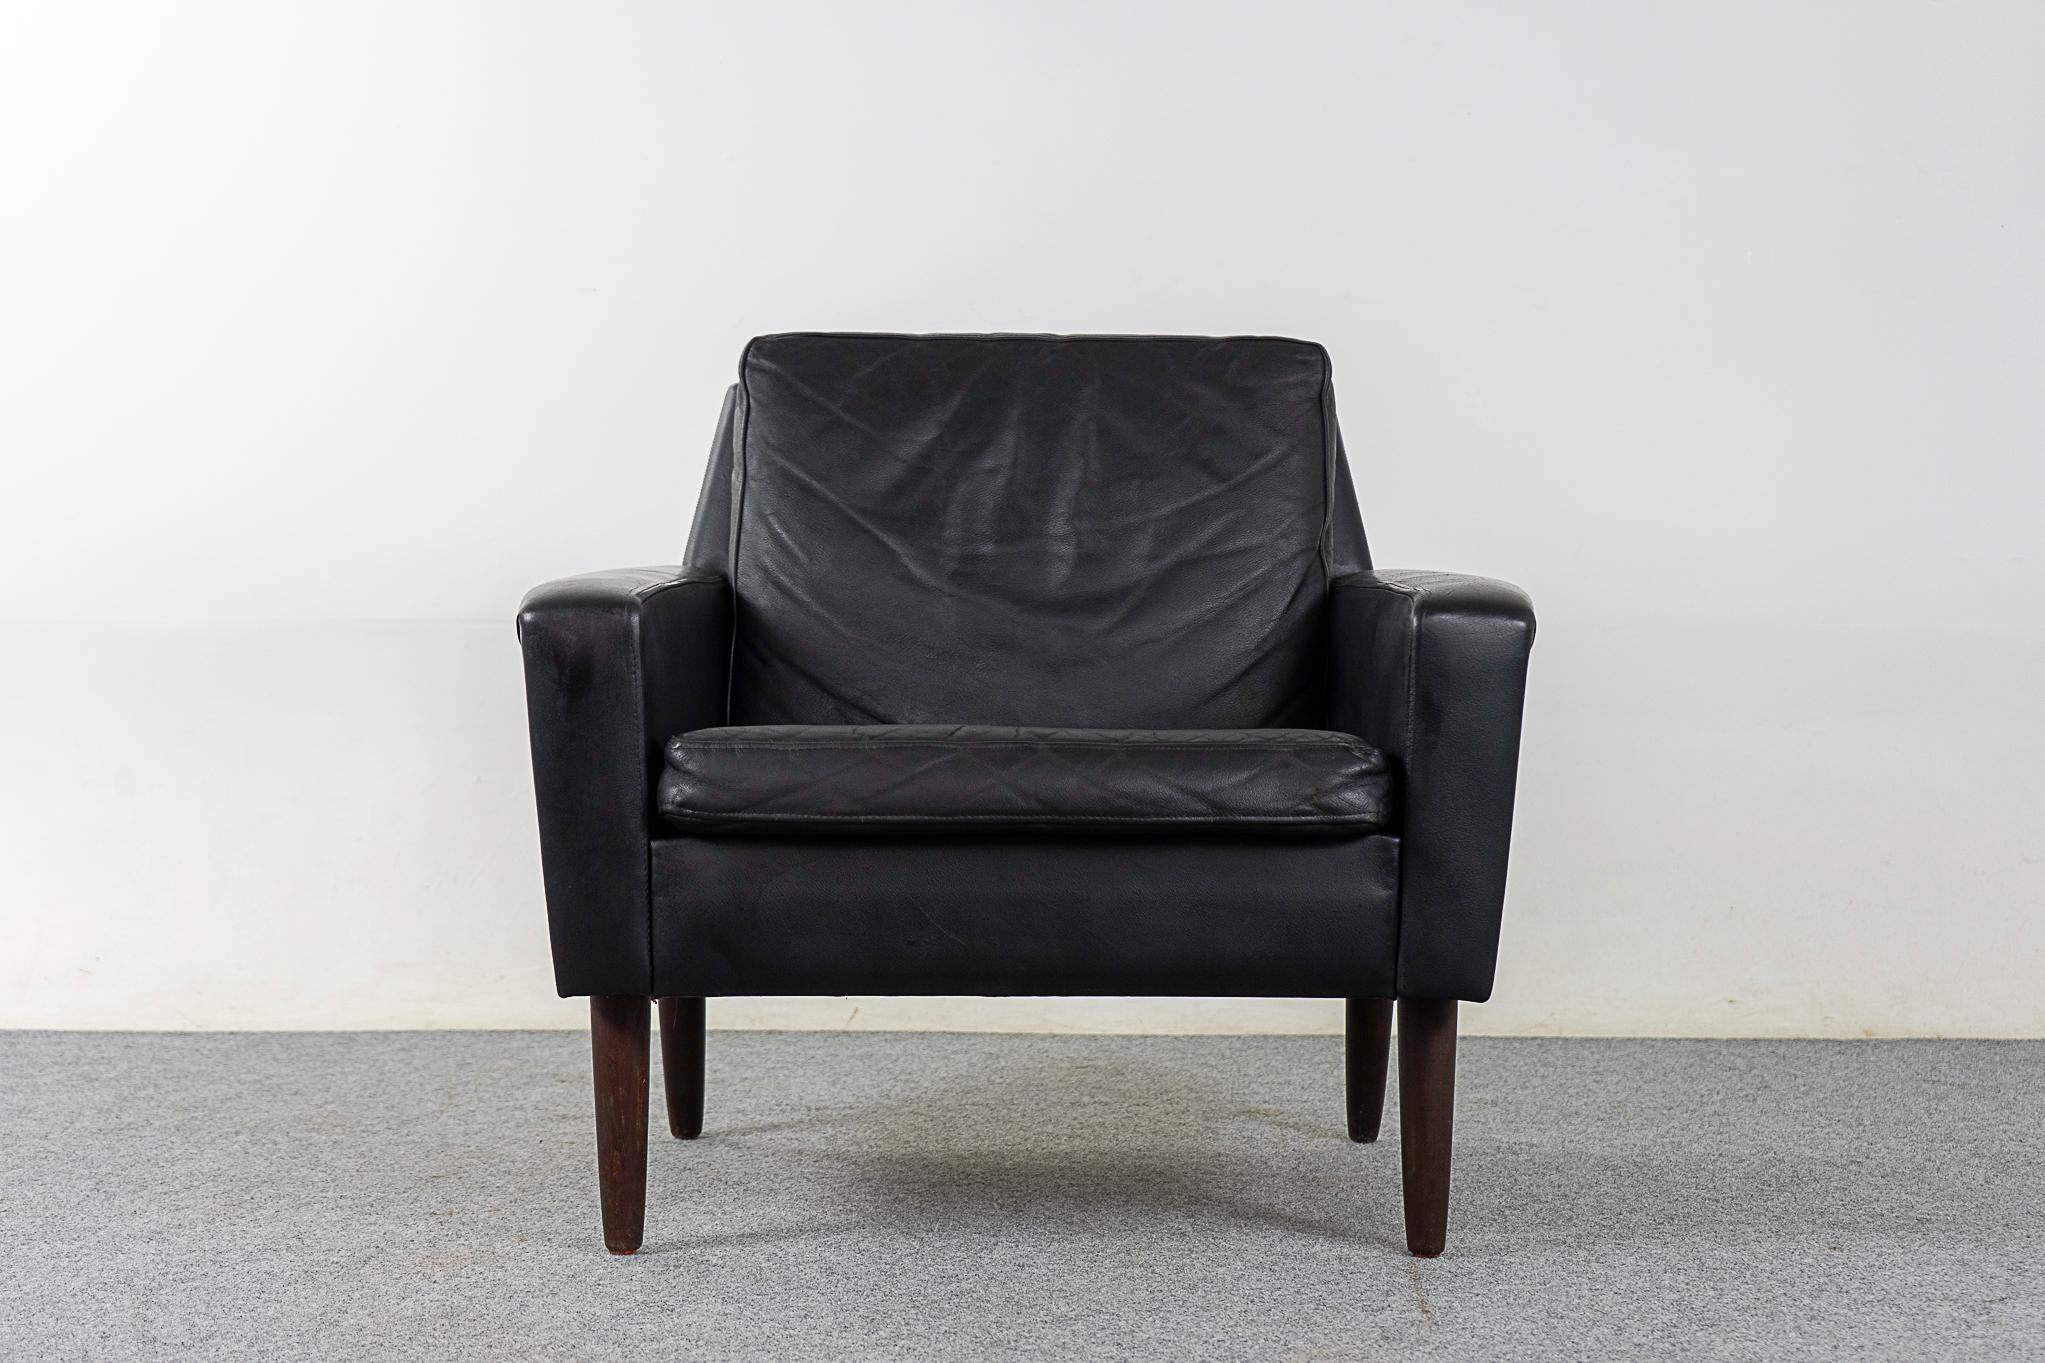 Leather and teak armchair, circa 1960's. Clean, sleek modern lines and original black leather. Very minor wear, lots of life in it yet! 

Please inquire for remote and international shipping rates.